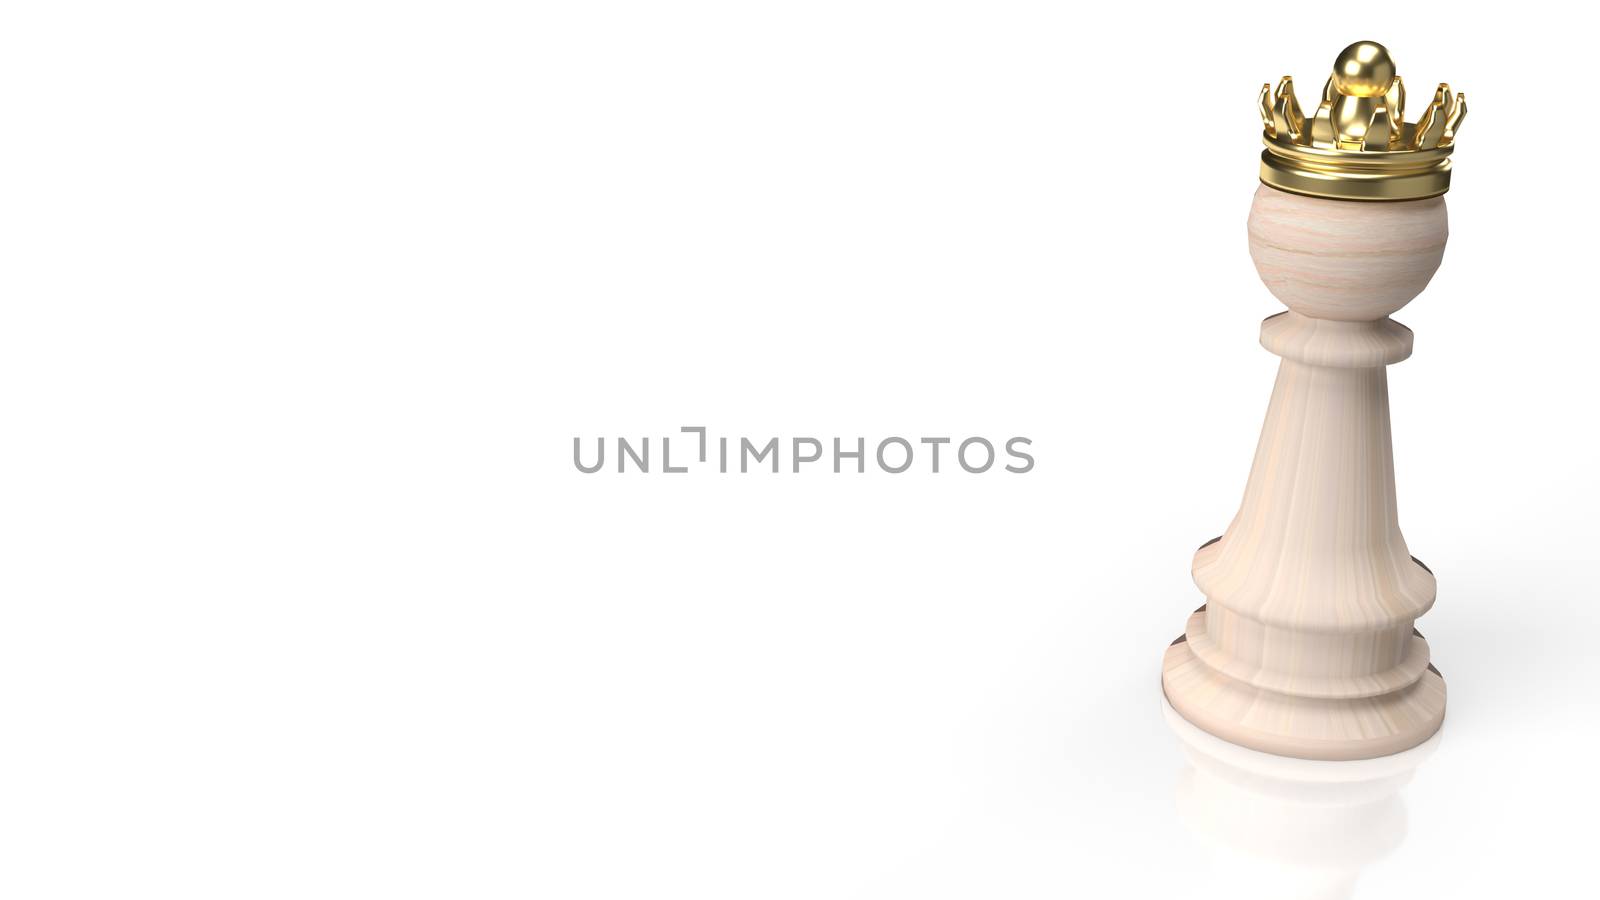 wood chess and gold crown on white background for business content 3d rendering.